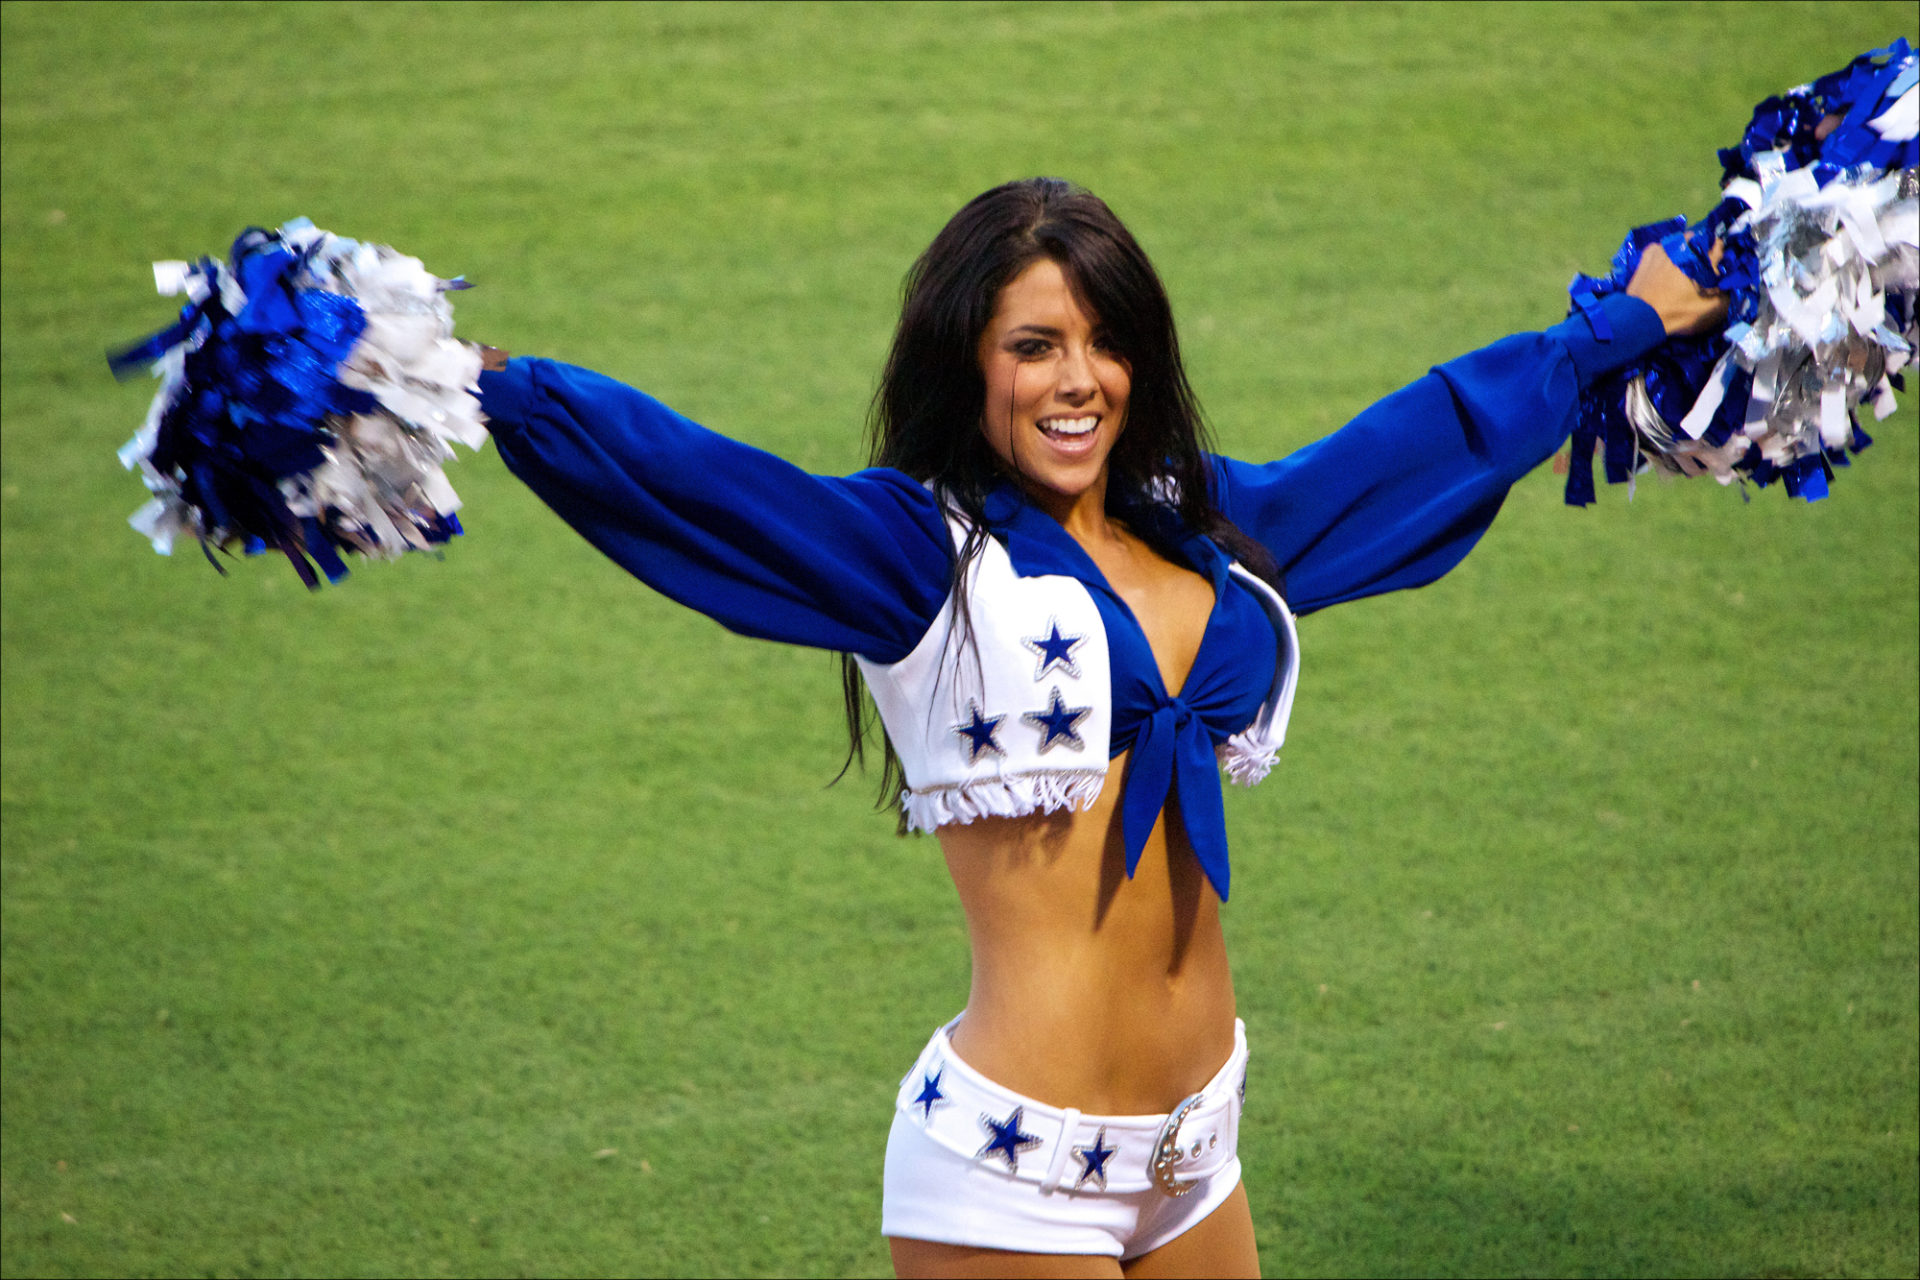 How Much Does A NFL Cheerleader Make